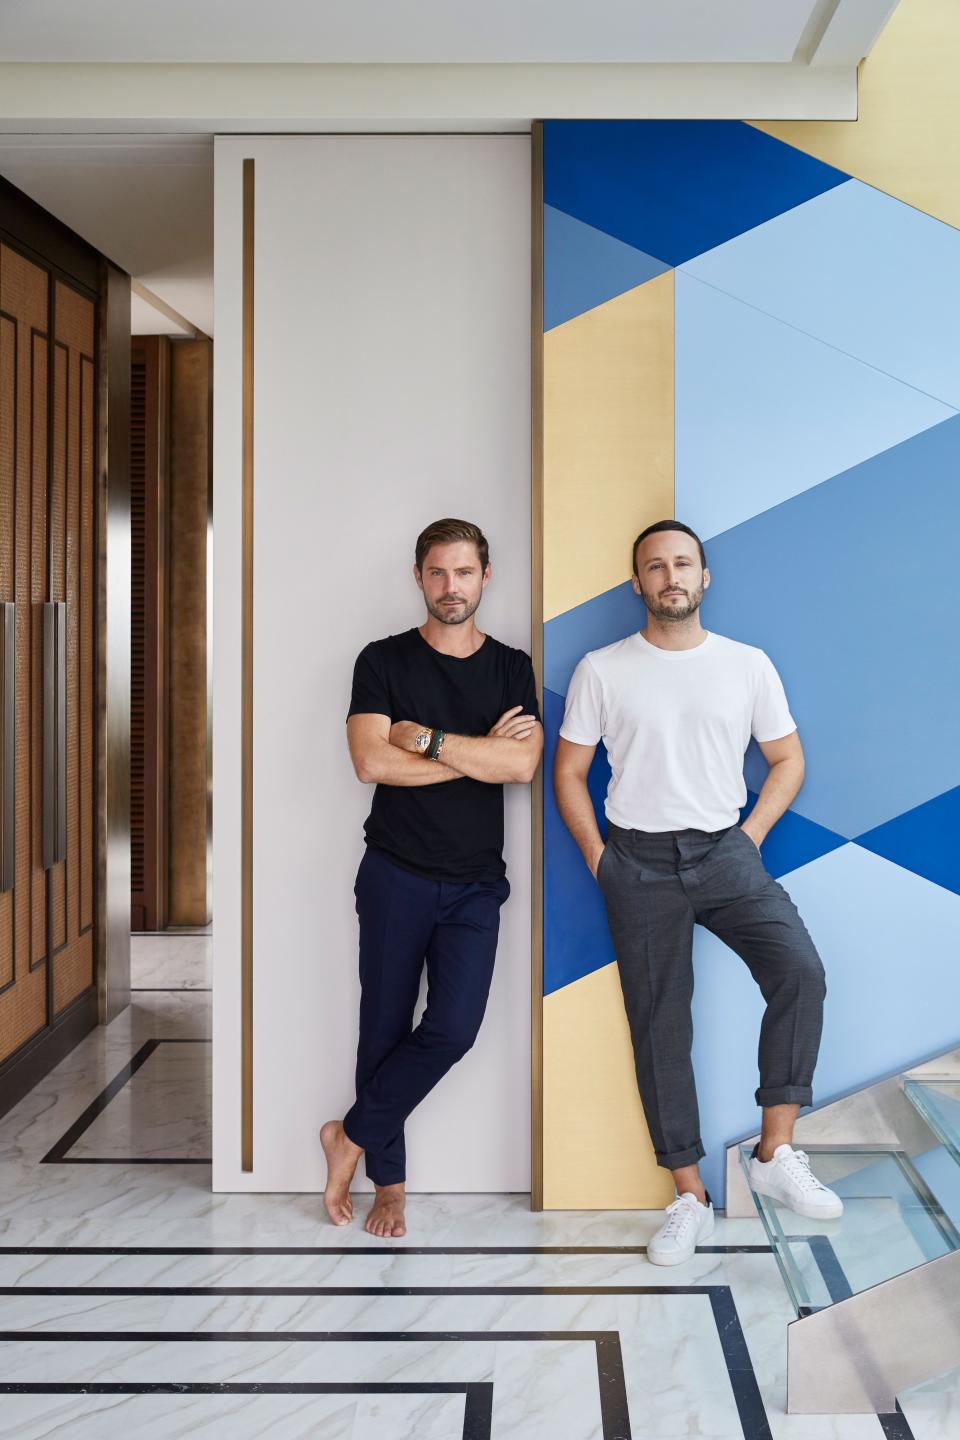 Emil Humbert (left) and Christophe Poyet standing in front of the wall composed of wood panels in brass and three shades of blue—Marine, Azur, and French. The floor is Calacatta Sponda and Nero Marquina; the cupboards in the background are caning, stained oak, and bronze handles.